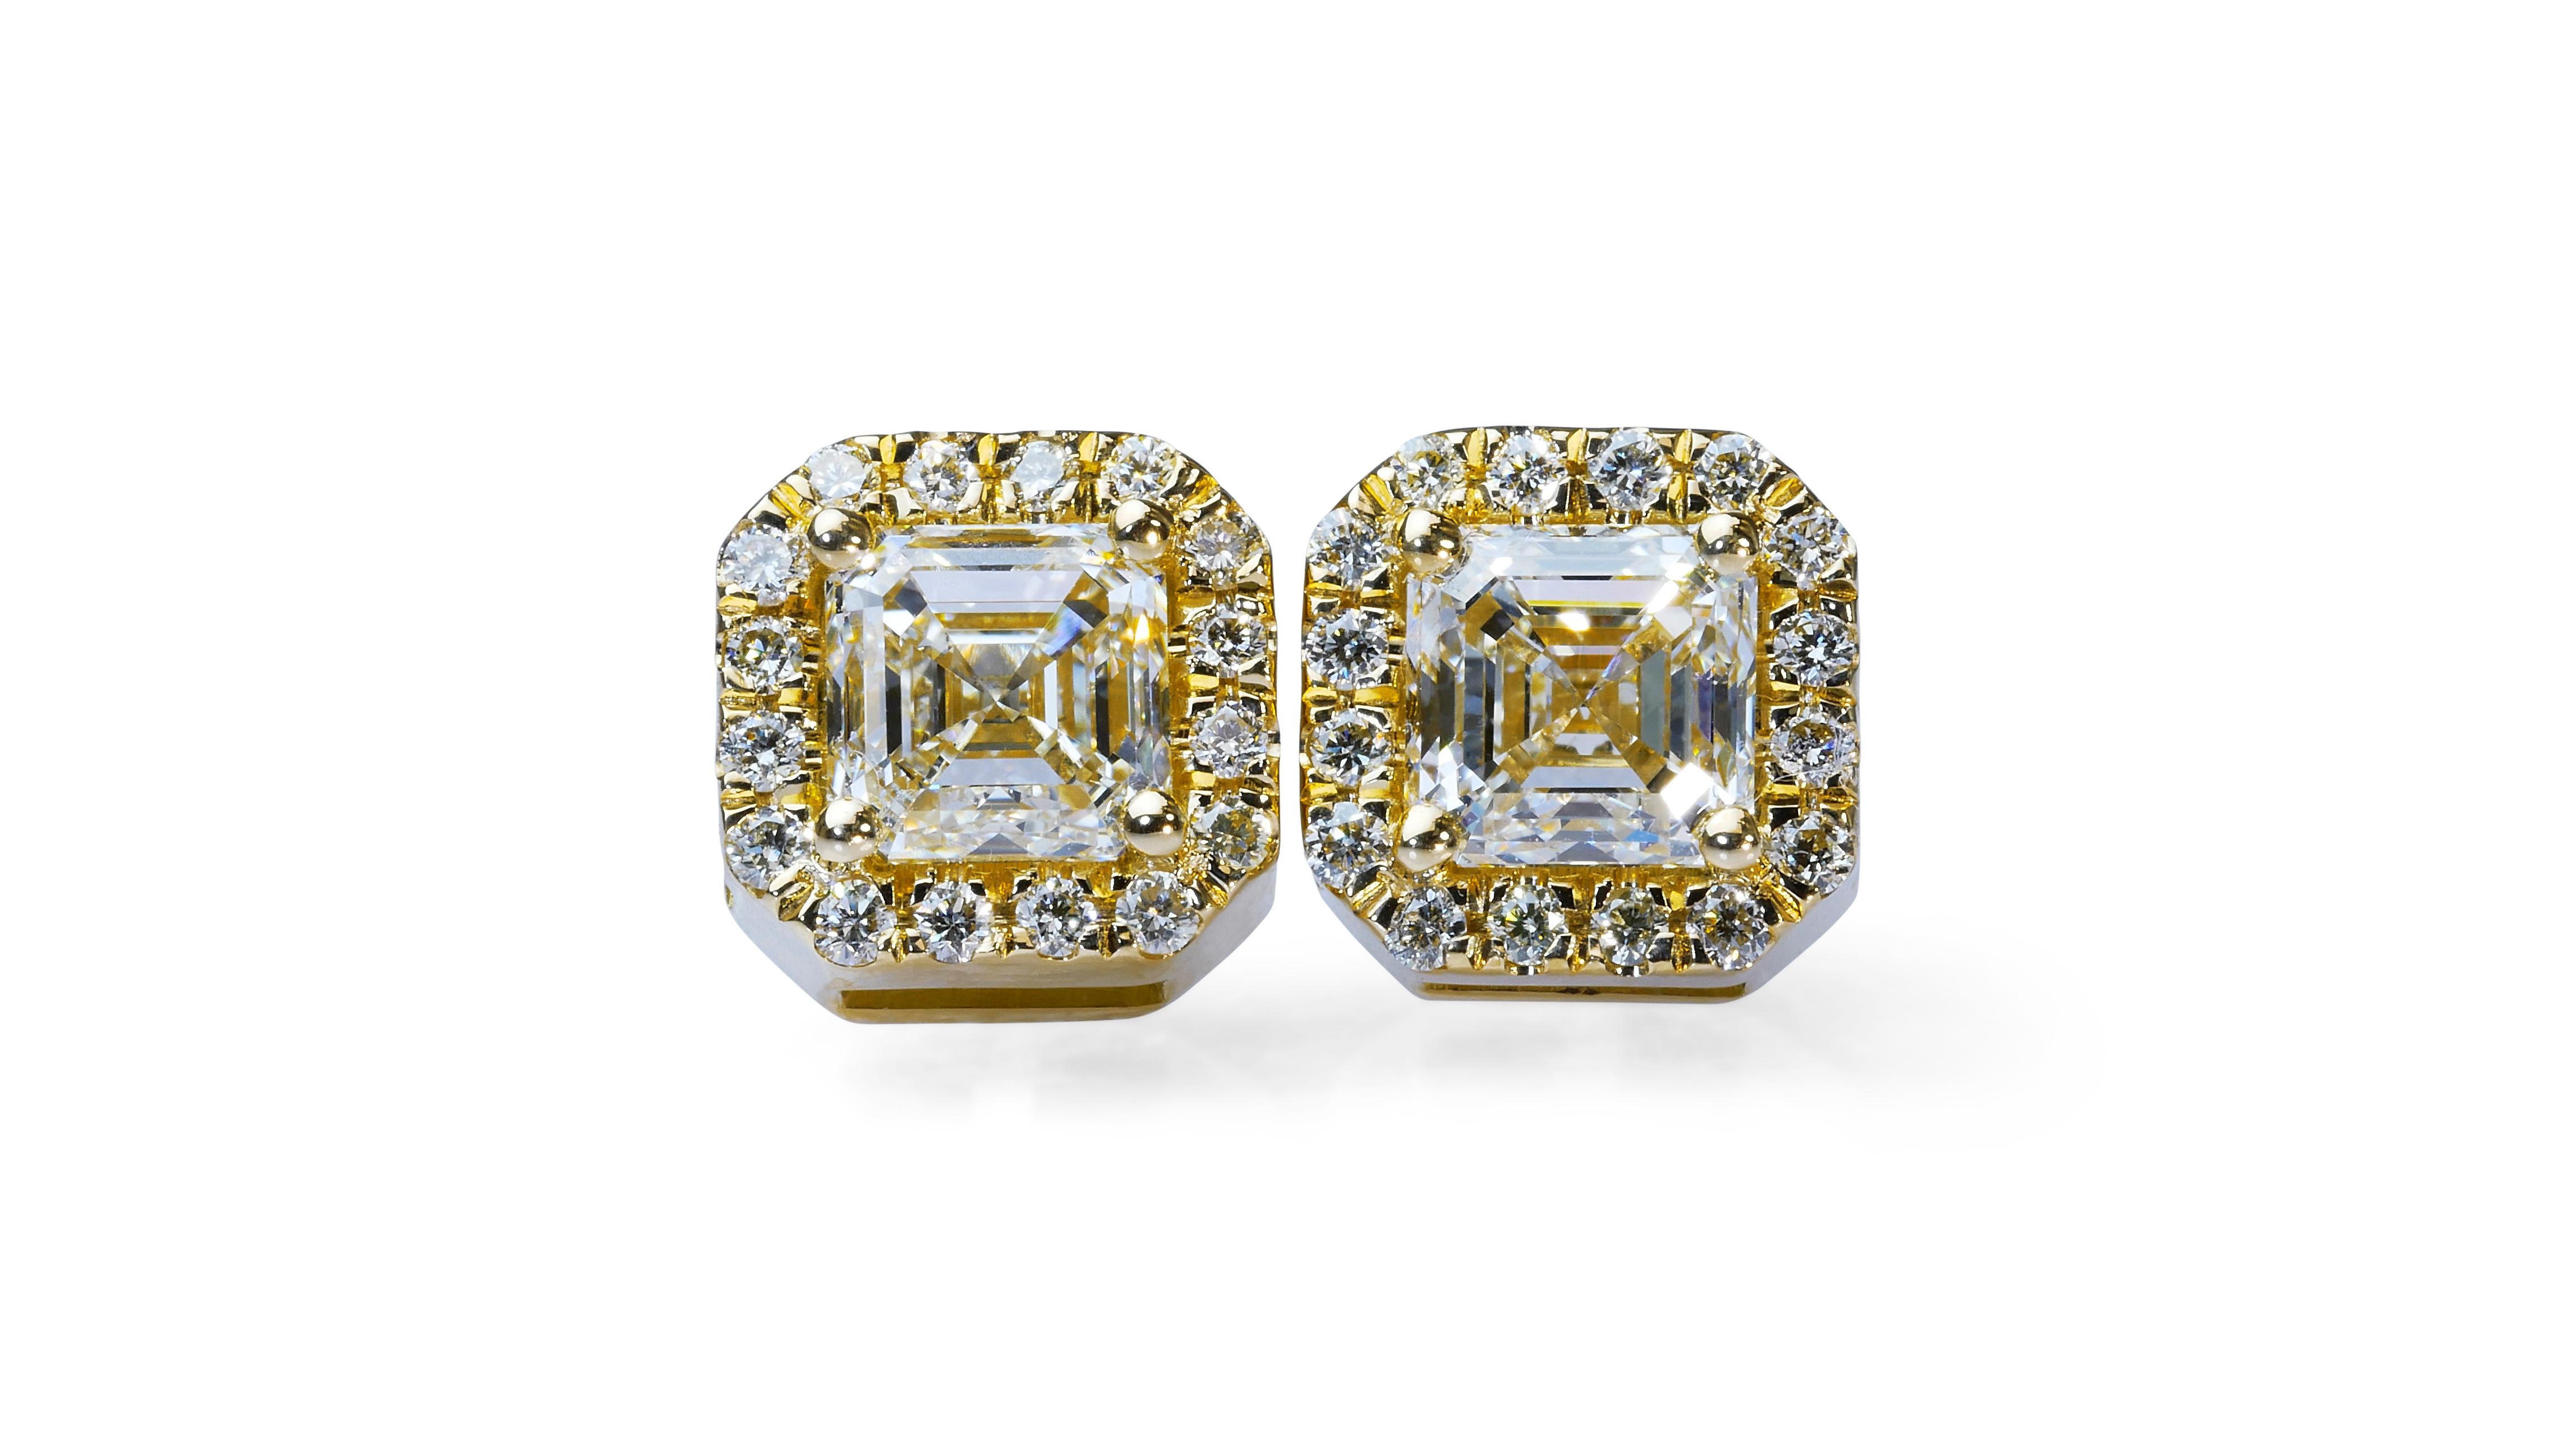 Square Cut Magnificent 1.74ct Diamond Stud Earrings in 18k Yellow Gold - GIA Certified  For Sale